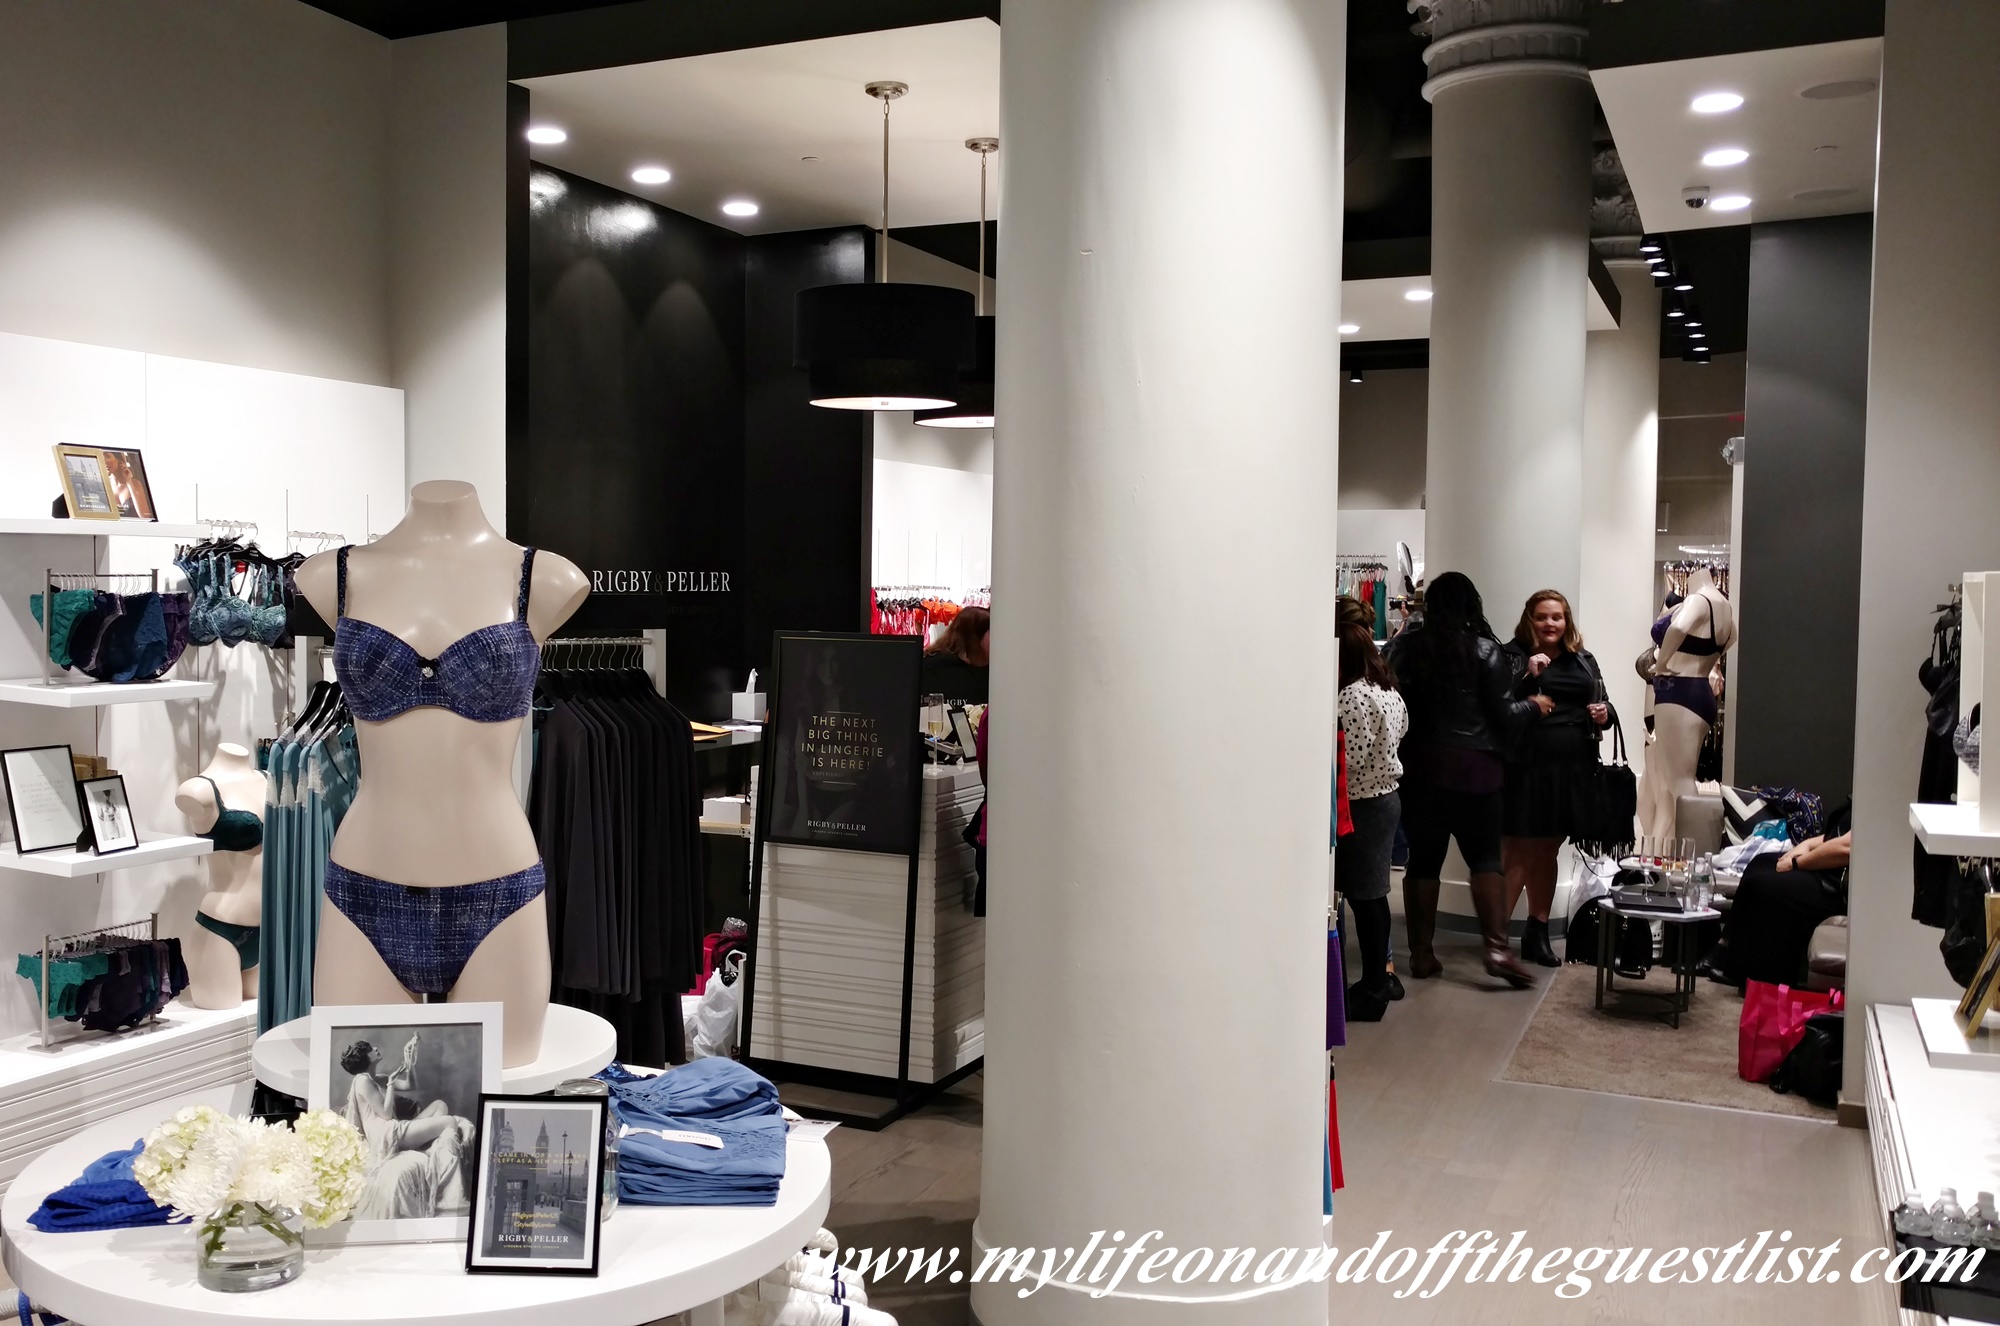 Luxury Fit for a Queen: Rigby & Peller Lingerie Stylists London